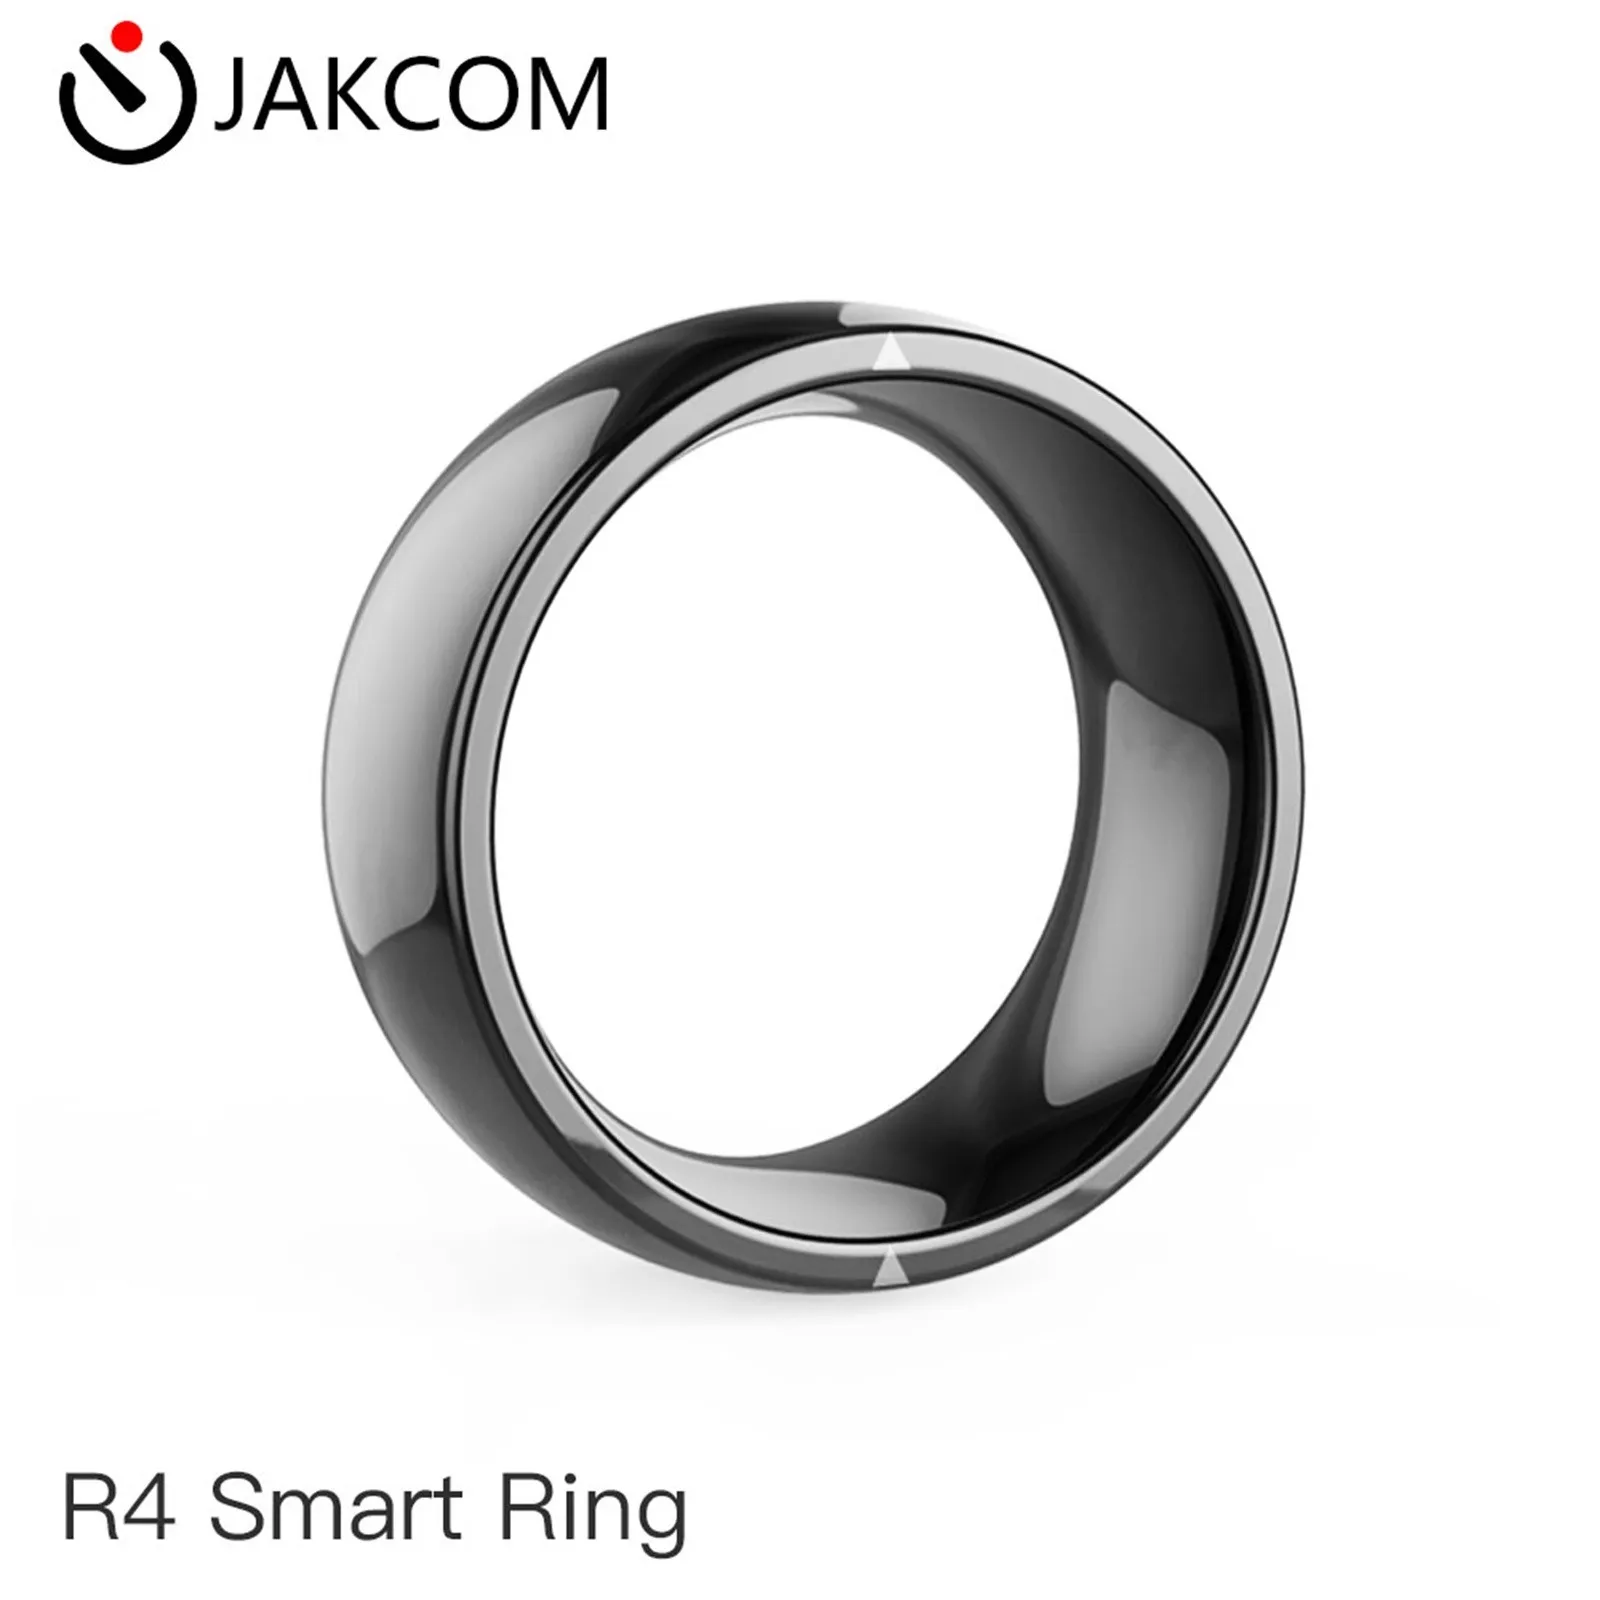 

R4 Smart ring NFC Wear Jakcom R3 R4 New technology Magic Finger Smart NFC Ring For IOS Android Windows NFC smartPhone